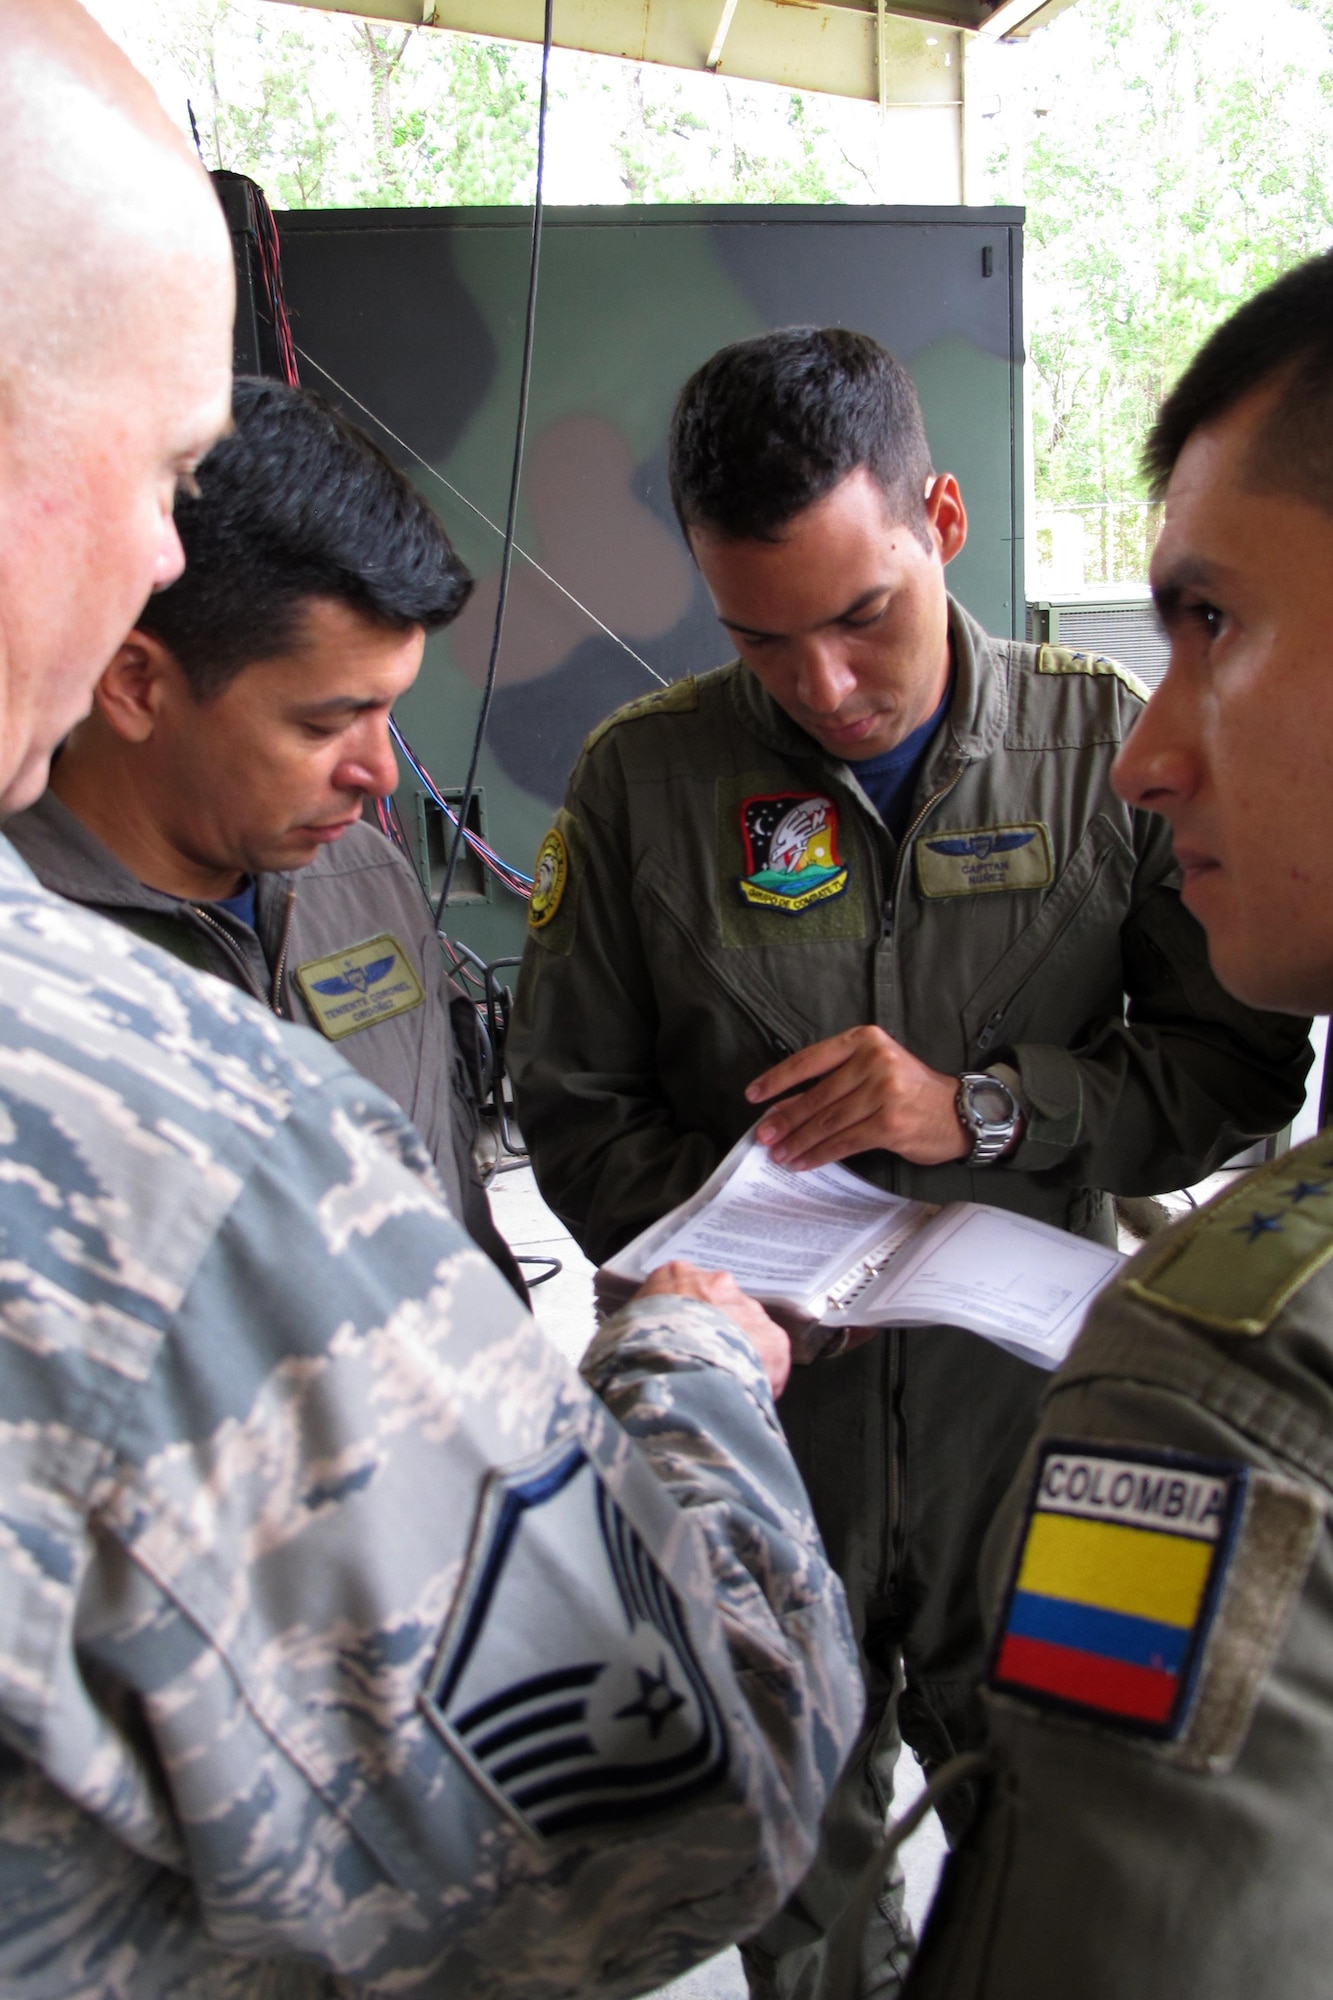 Members of the Colombian Air Force discuss training plans for U.S. Air Force Controllers during a visit with the Georgia Air National Guard’s 117th Air Control Squadron at Hunter Army Airfield in Savannah, Georgia during a State Partnership Program Subject Matter Expert Exchange on Ground Control Intercept, May 30-June 2, 2017. During the weeklong engagement the Colombians worked with Air Controllers from 117th shaping Colombian Air Force training plans by pairing experts together to exchange ideas. The Georgia Air National Guard supported the South Carolina National Guard’s State Partnership Program during the engagement.    (U.S. Air National Guard photo by Capt. Stephen D. Hudson)